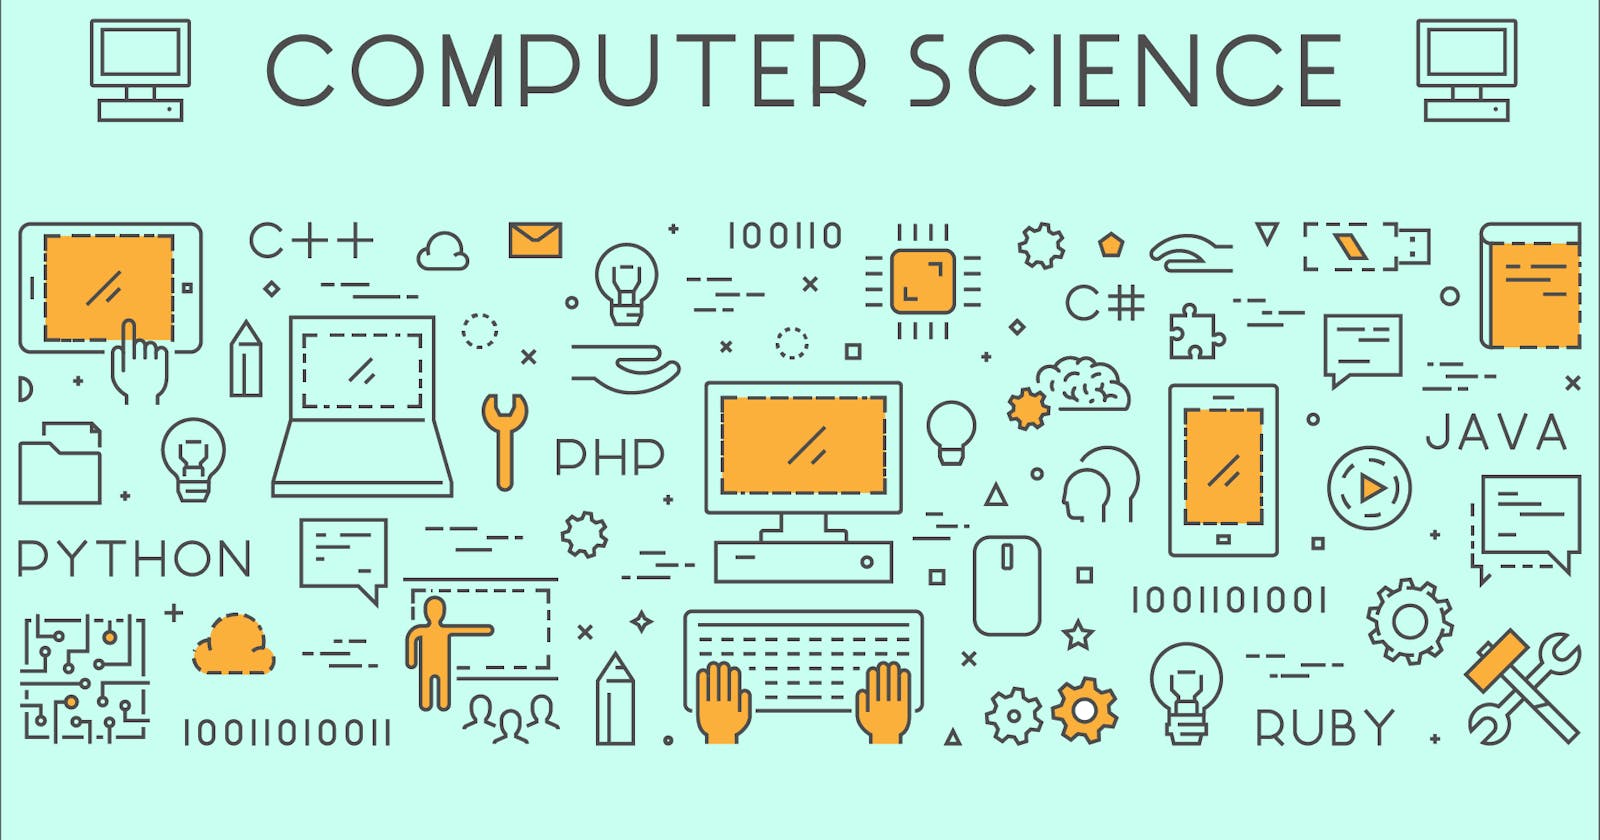 Introduction to computer science.